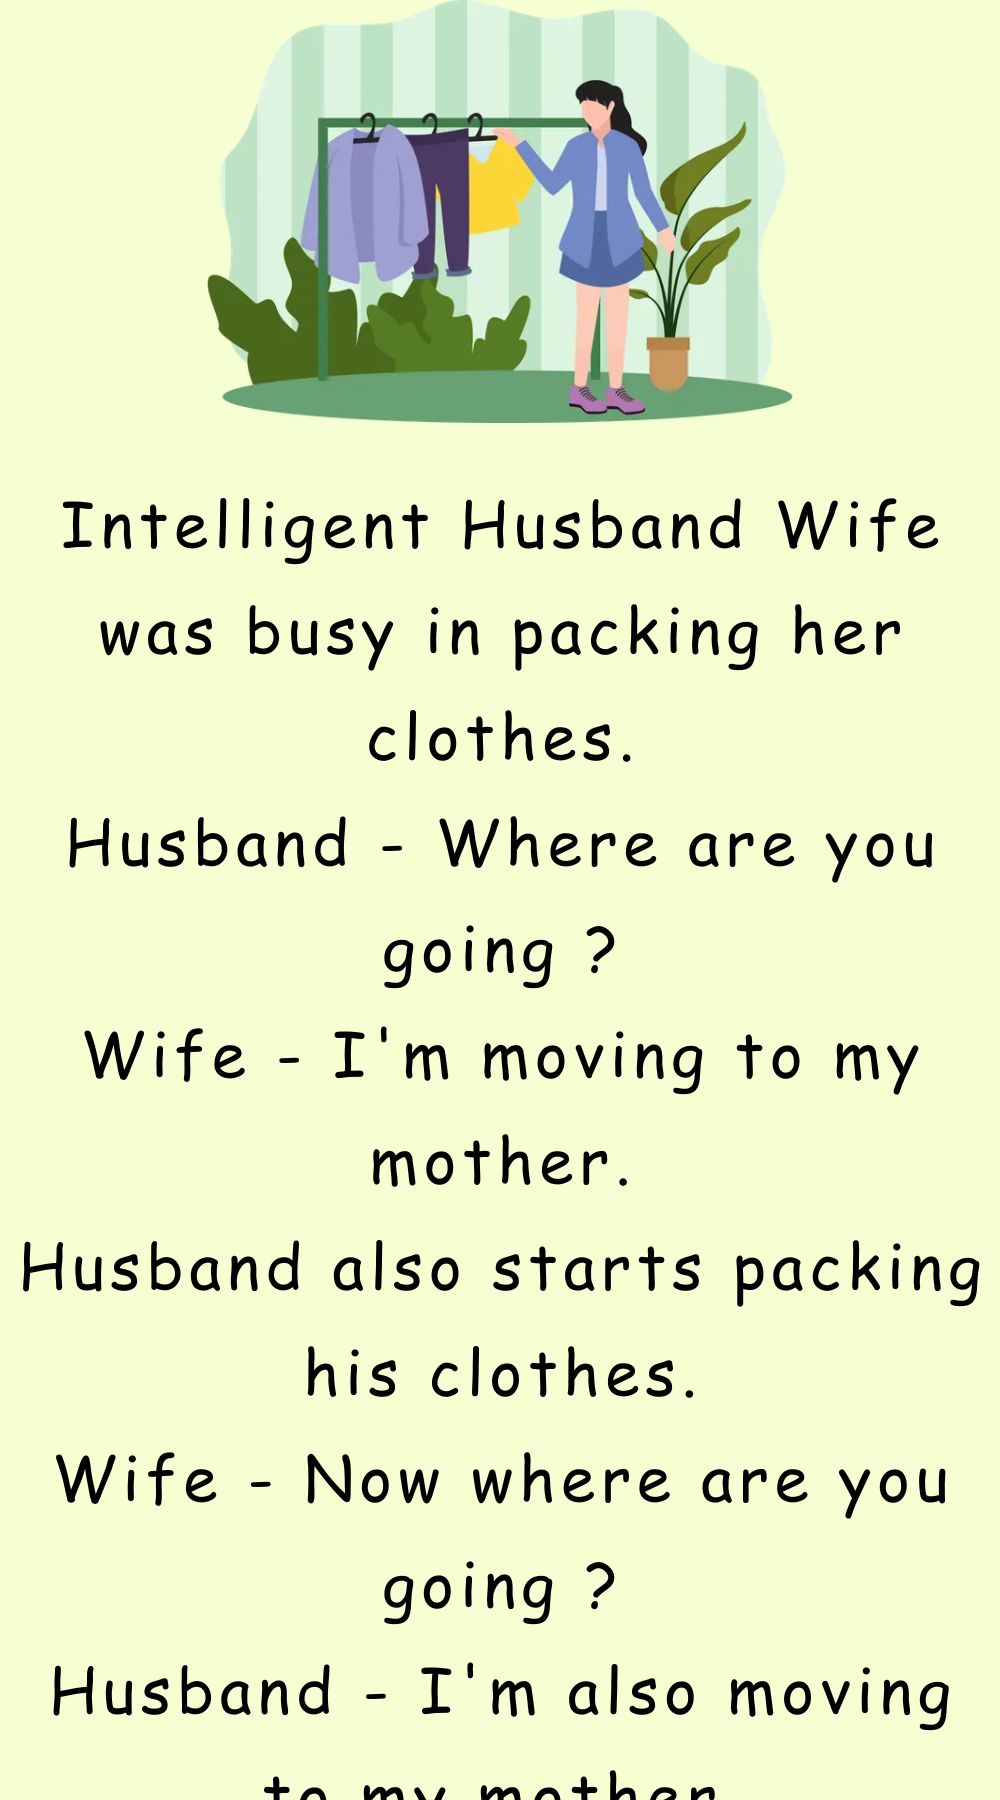 Intelligent Husband Wife was busy 